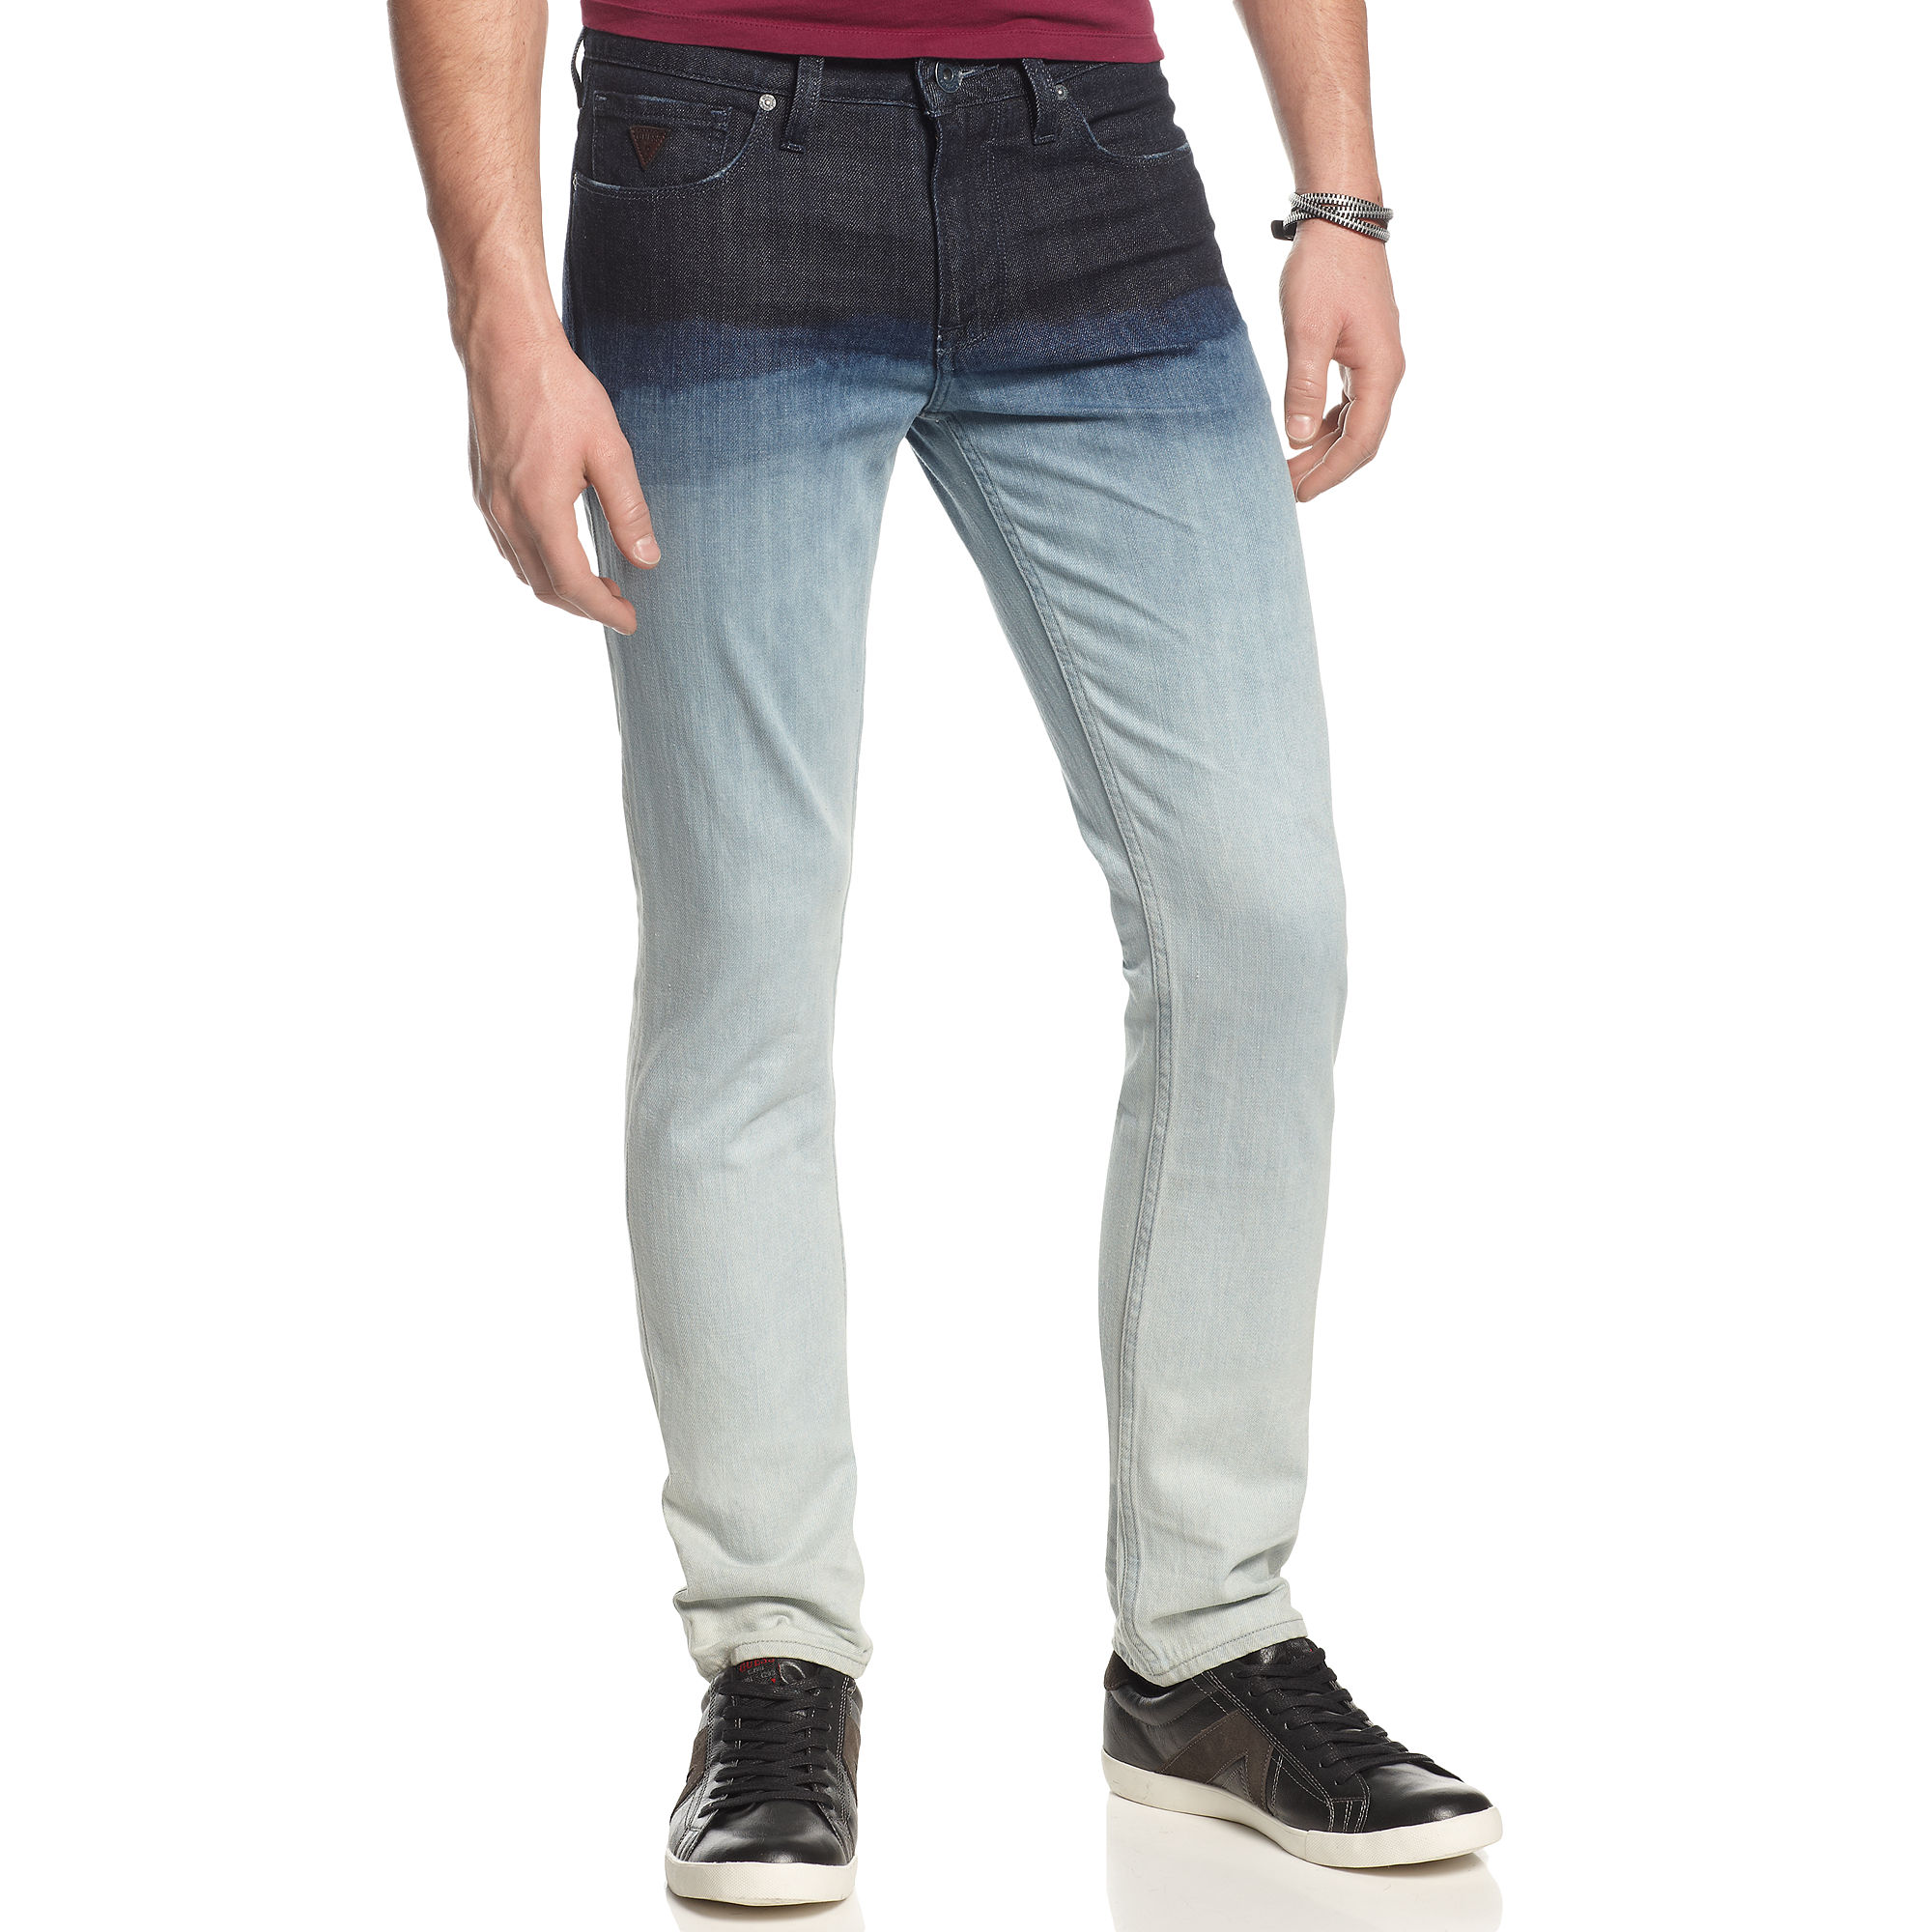 Lyst - Guess Skinny Fit Jeans in Blue for Men